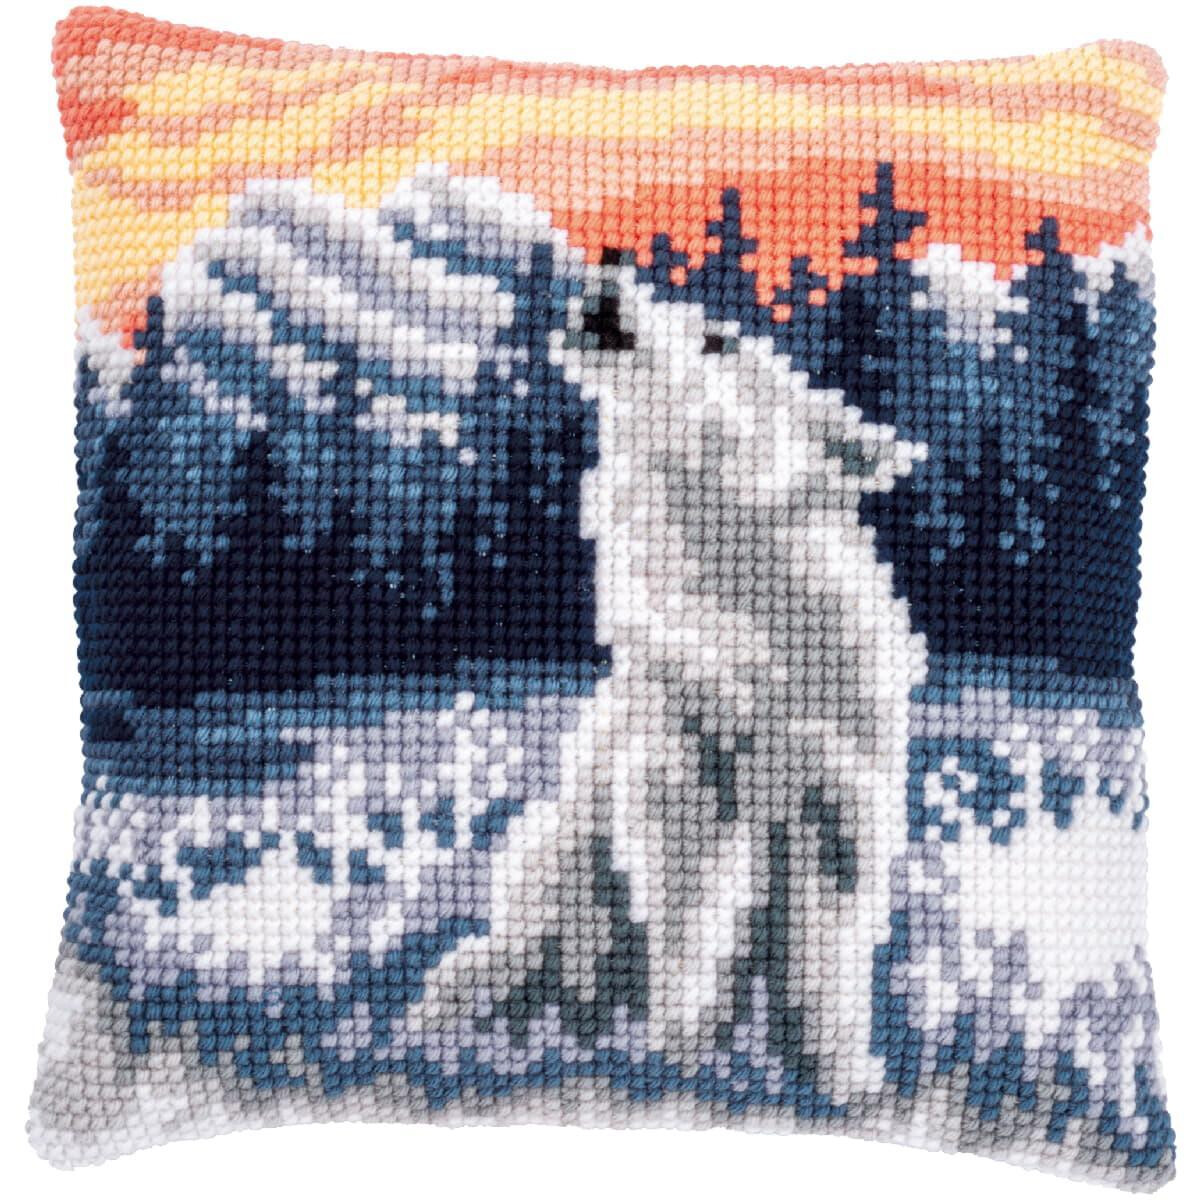 Vervaco stamped cross stitch kit cushion "Wolf in...